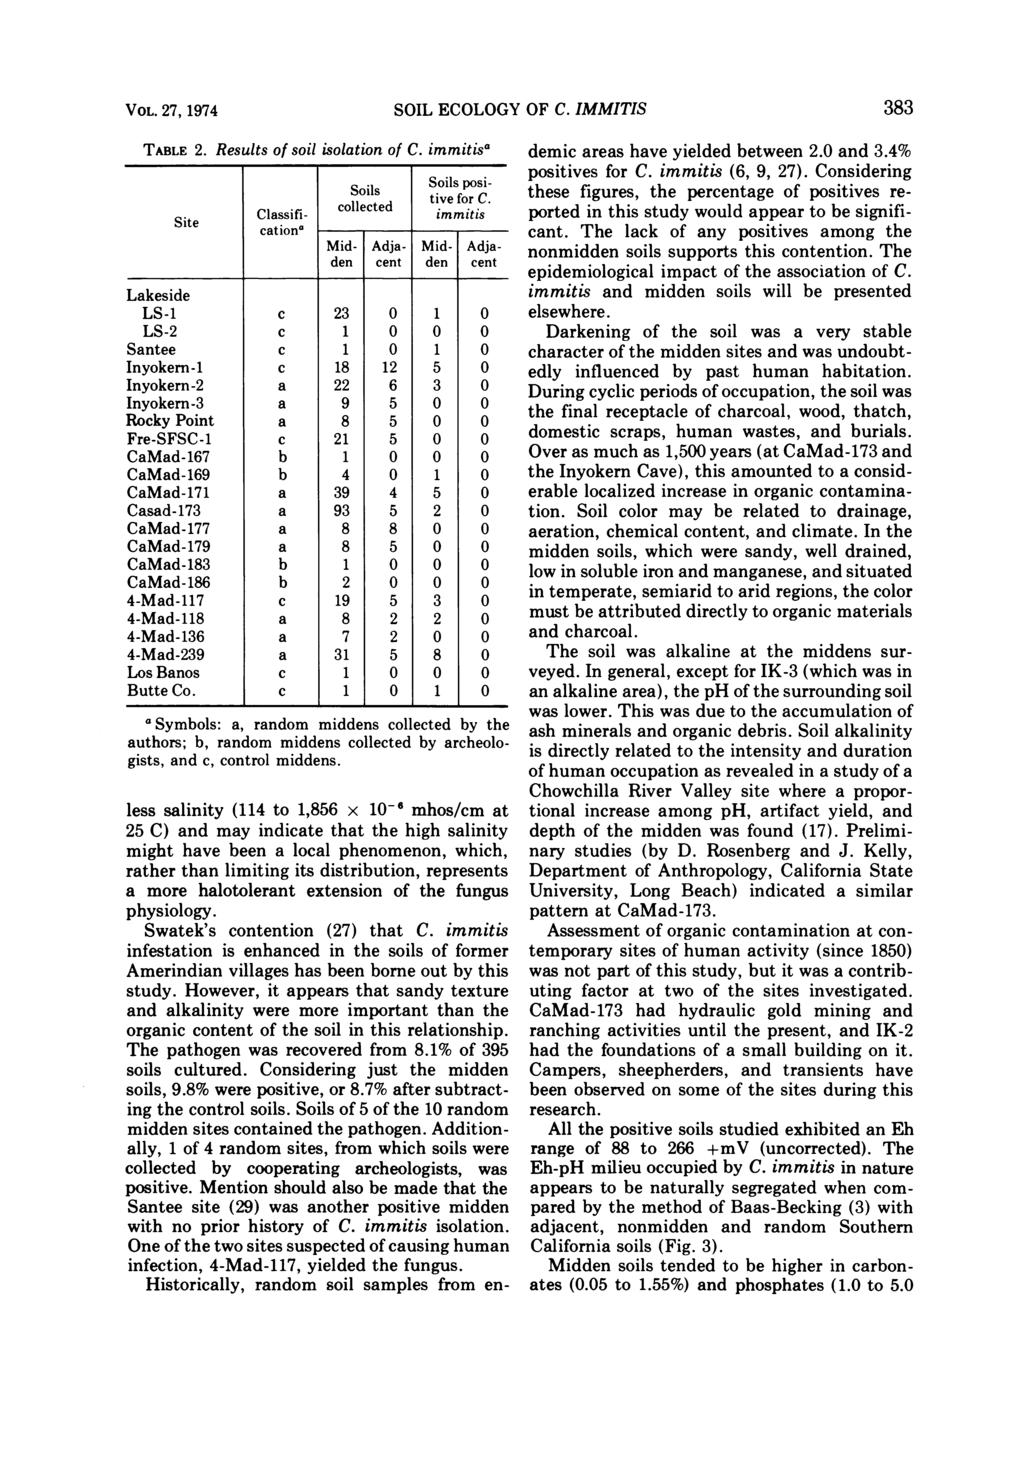 VOL. 27, 1974 TABLE 2. Site Results of soil isolation of C. immitisa Classifi- cationa SOIL ECOLOGY OF C. IMMITIS Soils Soils posicollected tive immitis for C.